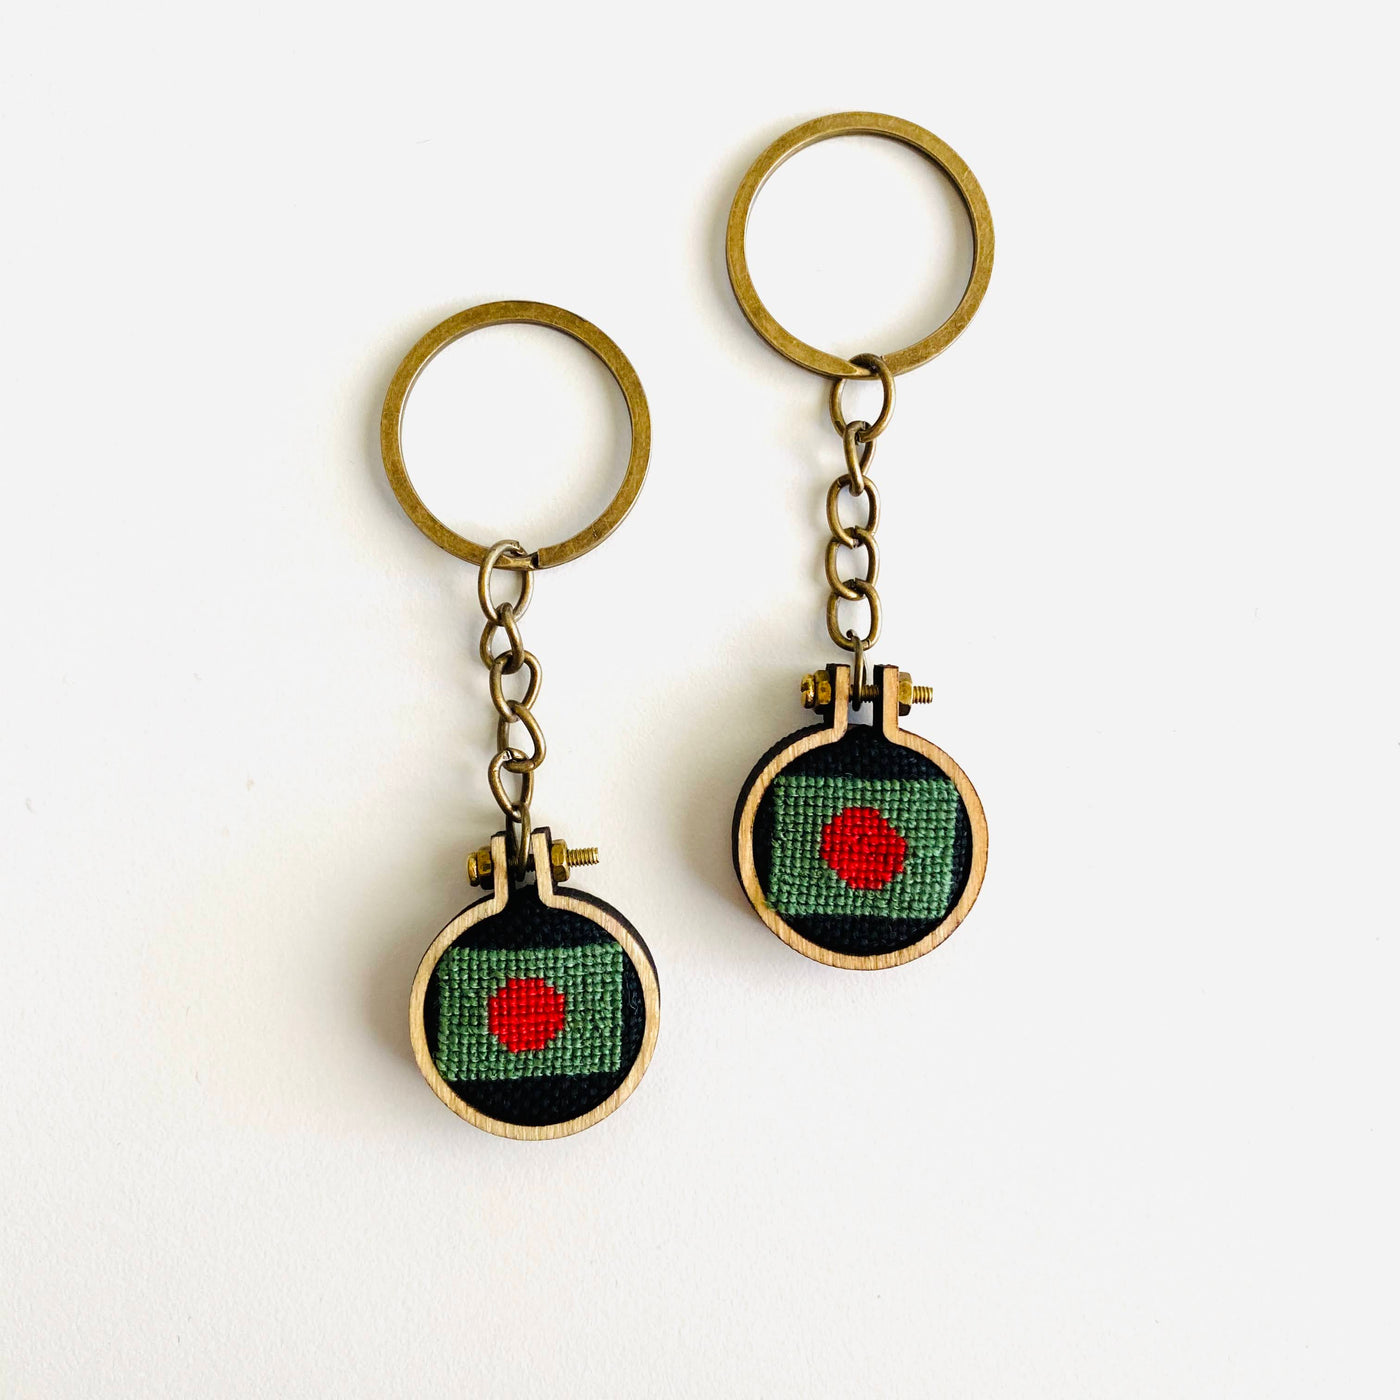 Custom Embroidered Mini Embroidery Hoop Keychain or Pin (100% of Proceeds Donated)